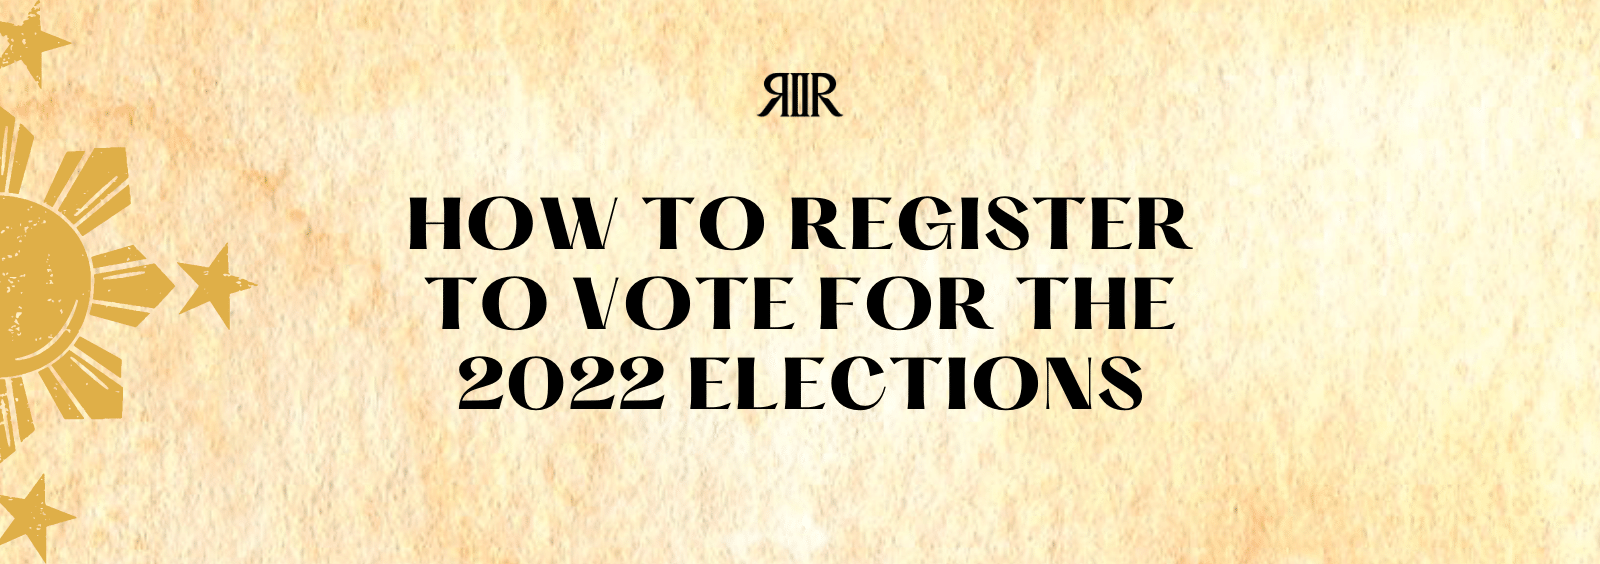 How to Register to Vote for Halalan 2022